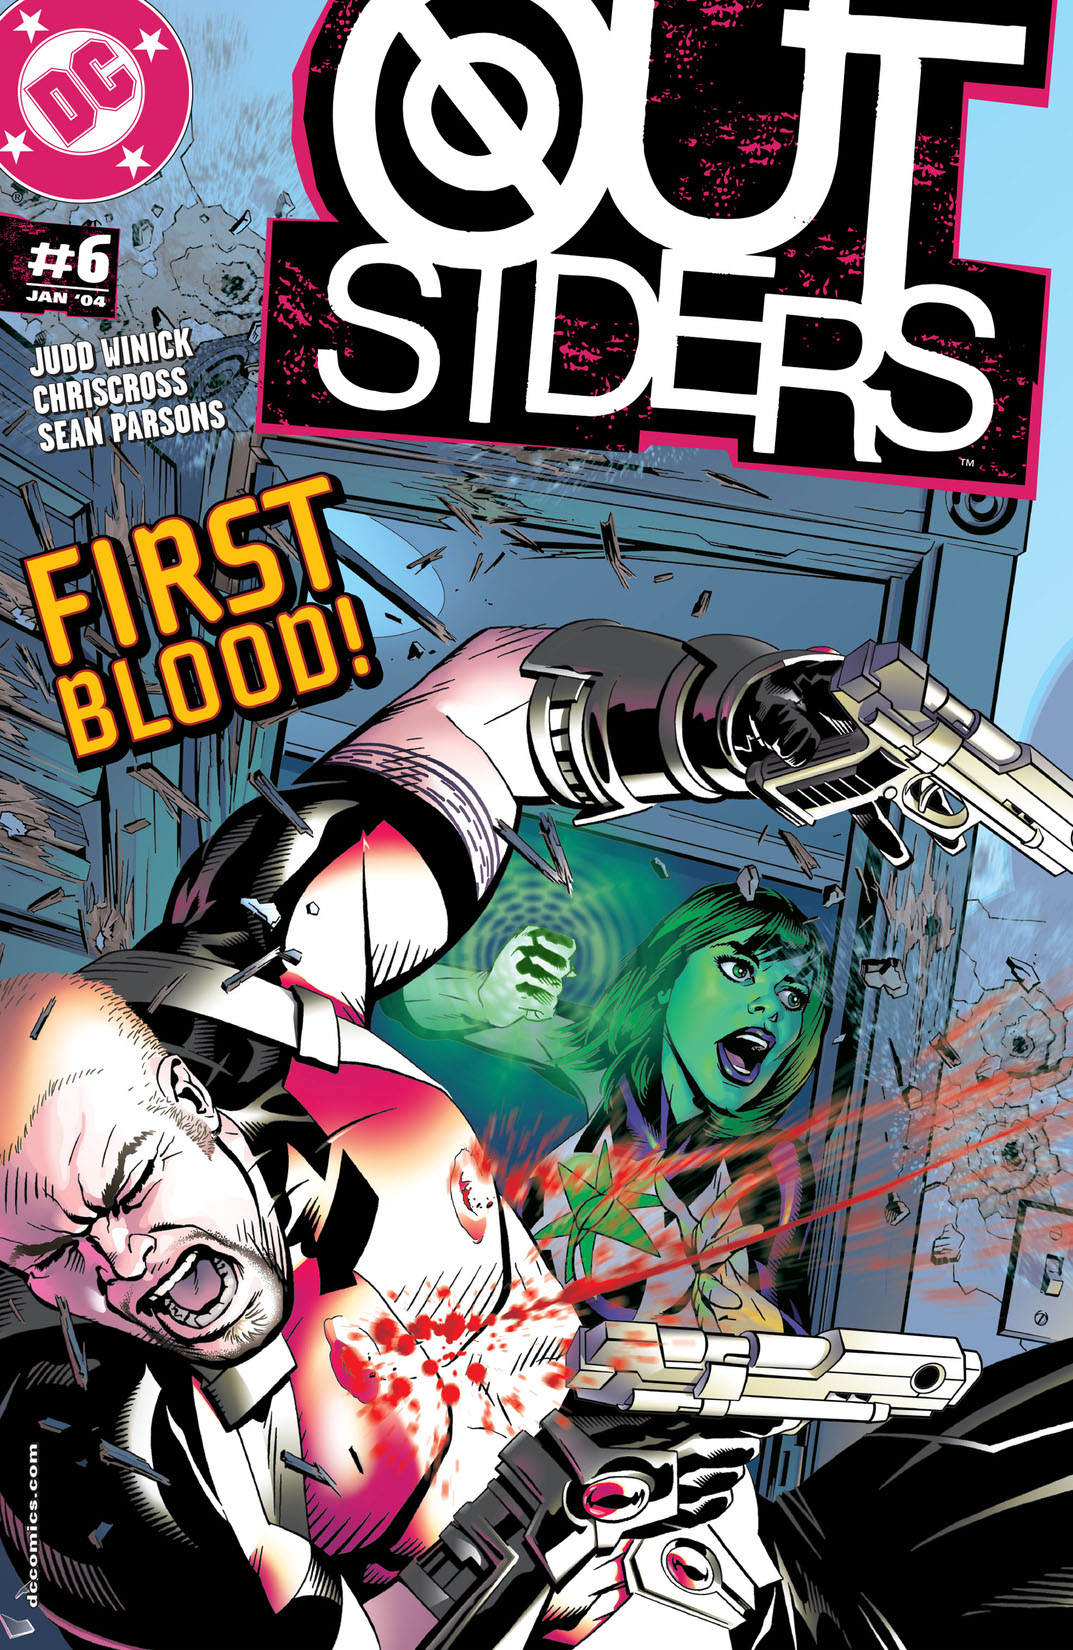 Outsiders (2003-) #6 preview images